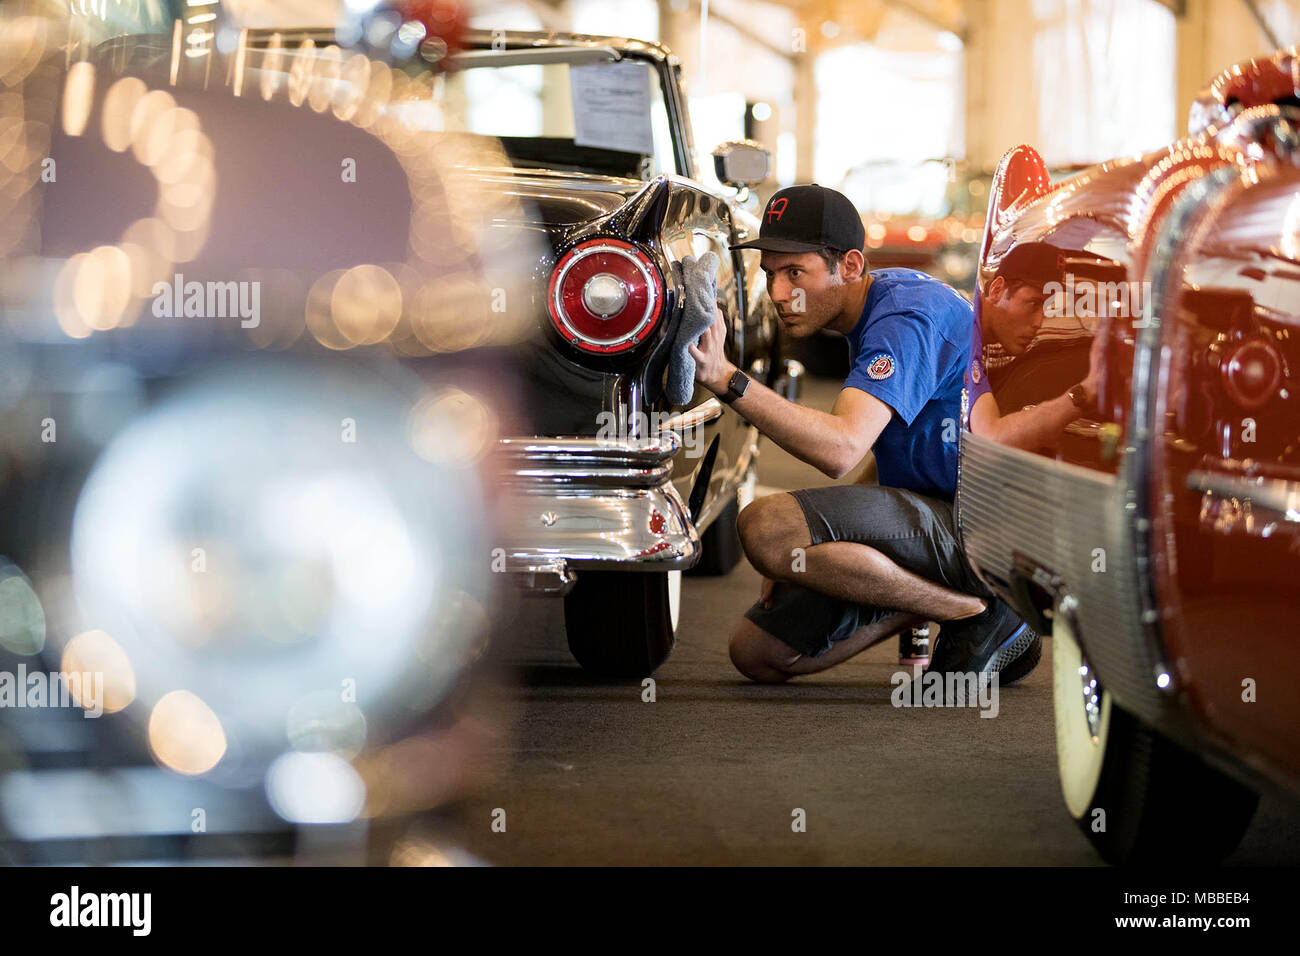 April 10, 2018 - West Palm Beach, Florida, U.S. - Kyle Martin of Adam's Polishes details a 1957 Ford Fairlane 500 Skyliner E-Code Retractable Hardtop between to Cadillac Eldorados owned by John Staluppi. Staluppi is auctioning off more than 140 cars from his Cars of Dreams Collection housed in his museum in North Palm Beach. The Barrett-Jackson auto auction runs April 12-15 at the South Florida Fairgrounds. The auto auction will last four days this year due to the number of car's Staluppi is selling. (Credit Image: © Allen Eyestone/The Palm Beach Post via ZUMA Wire) Stock Photo